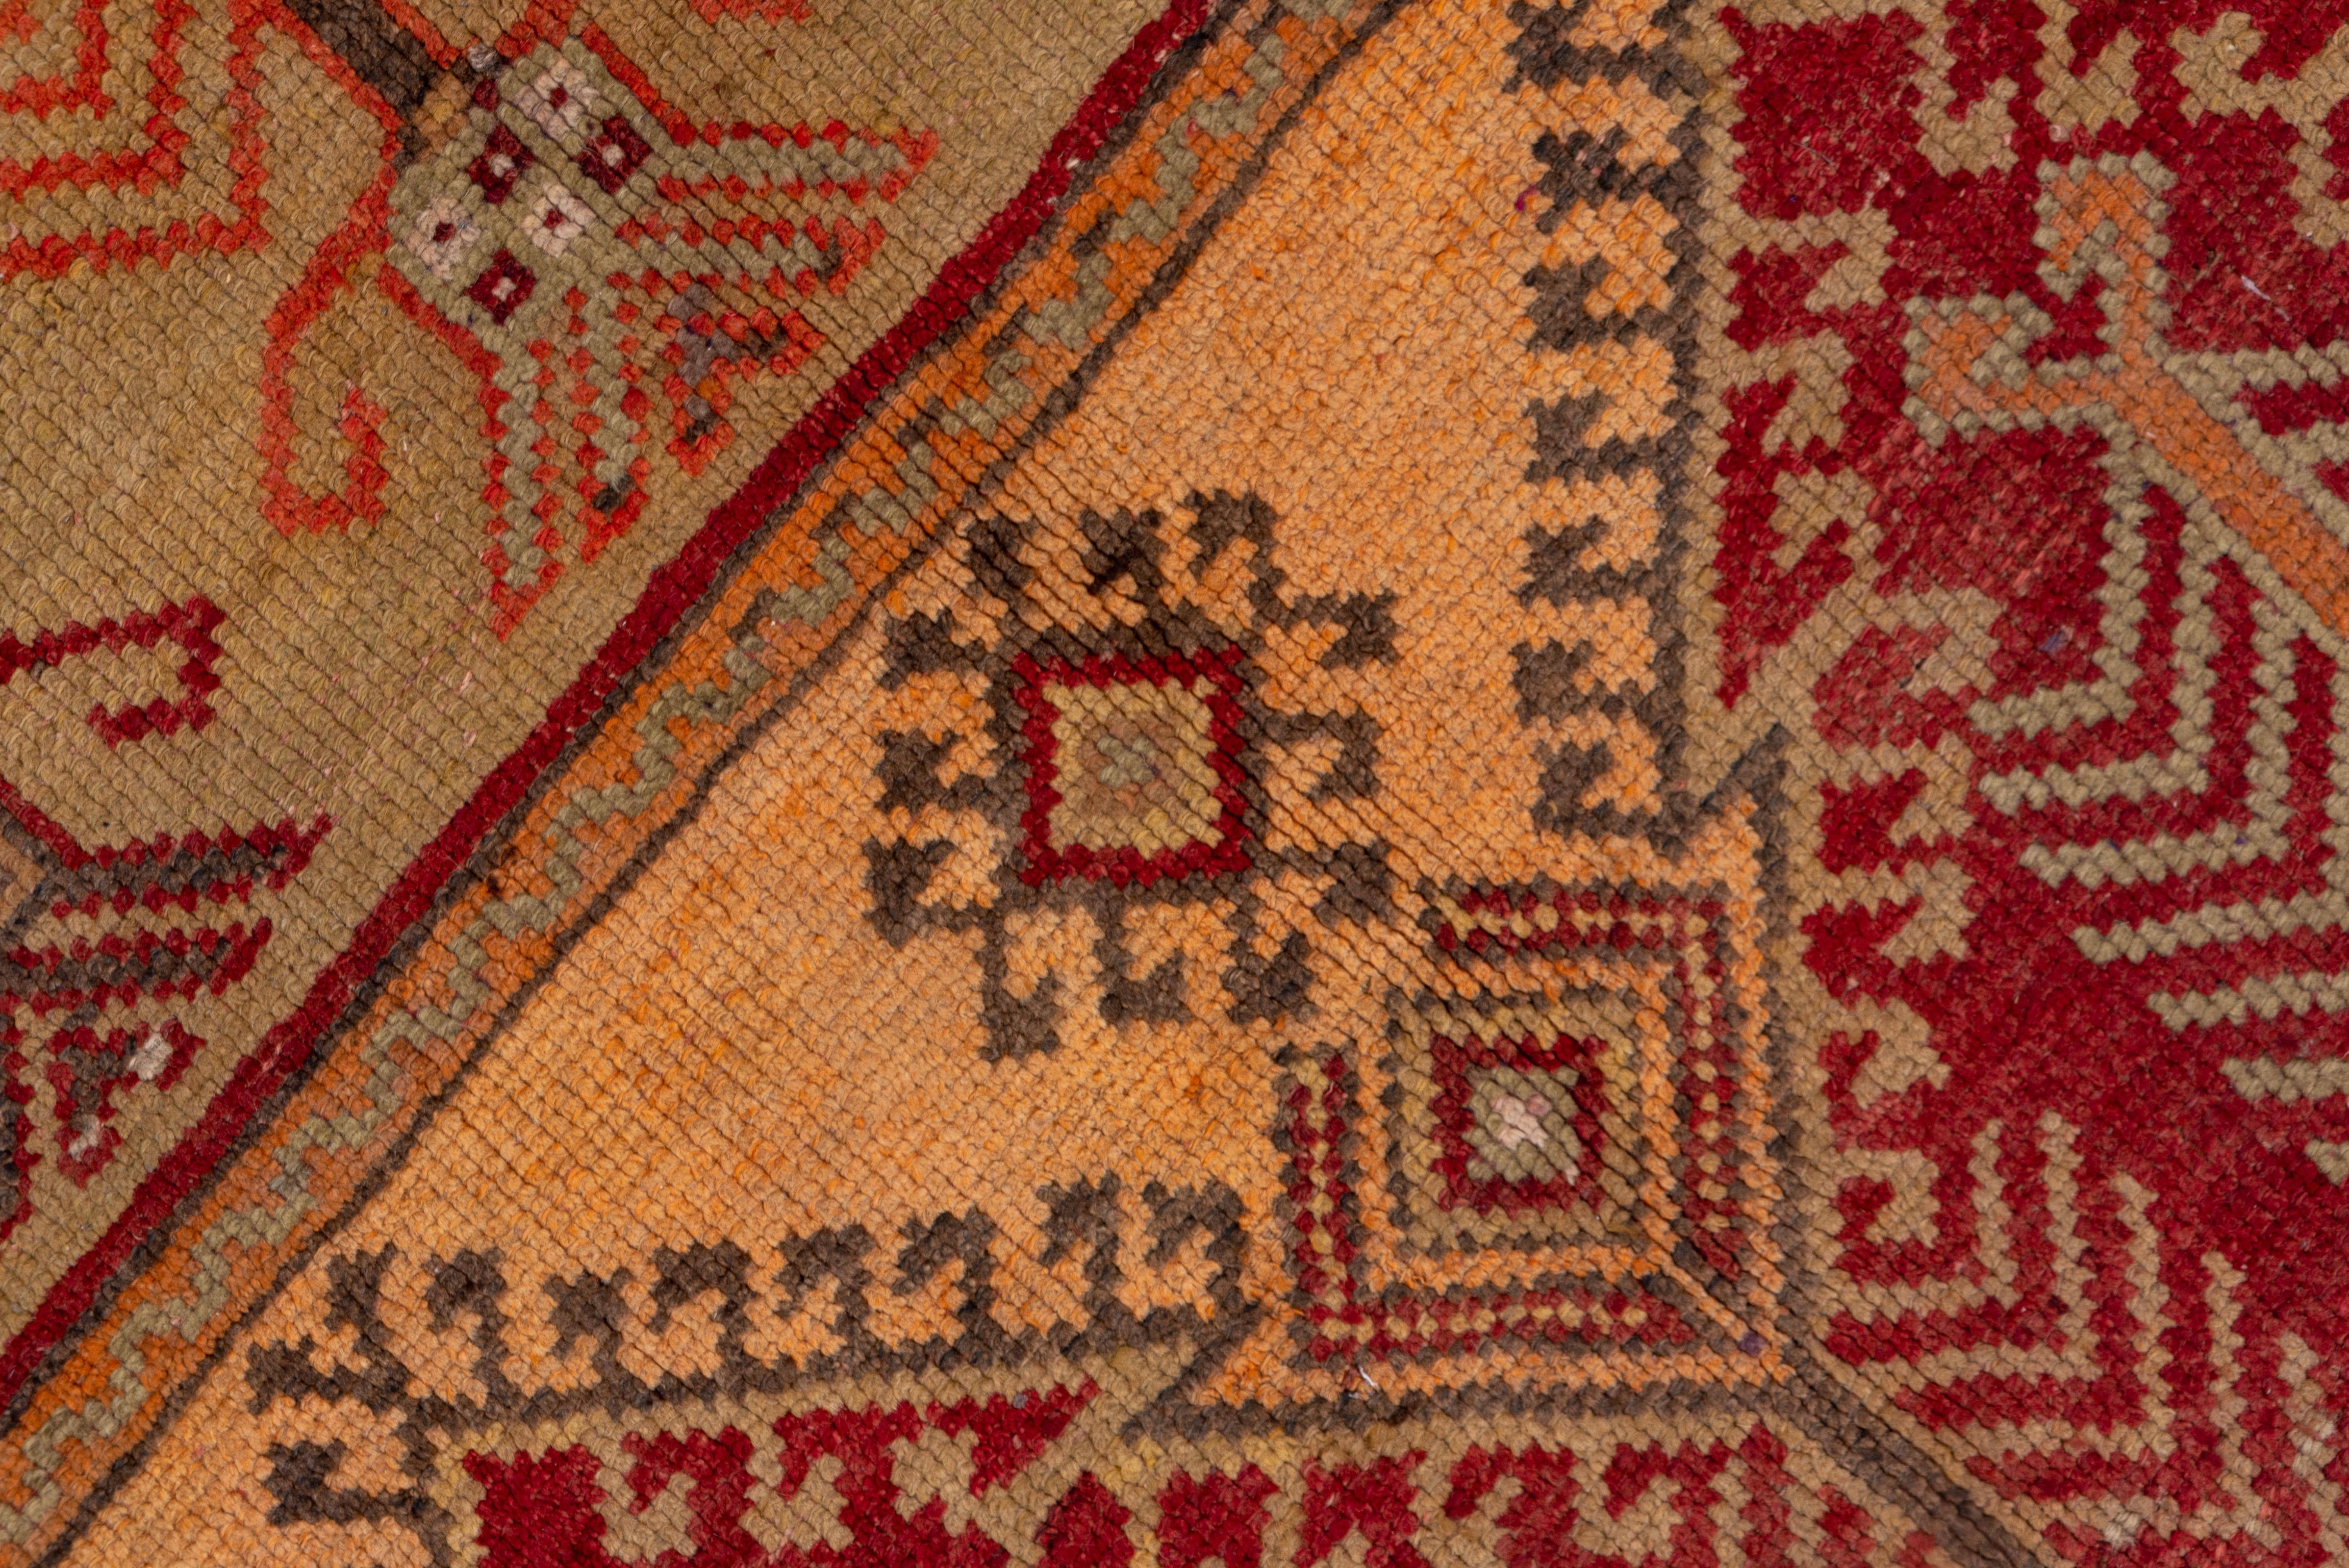 This Anatolian rustic carpet shows five panels, each of two pointed mihrab arches in red or khaki, beneath straw spandrels, and enclosing feathery plants in simple vases. This is a saph (multiple prayer rug) idea. Main border of serrated angled